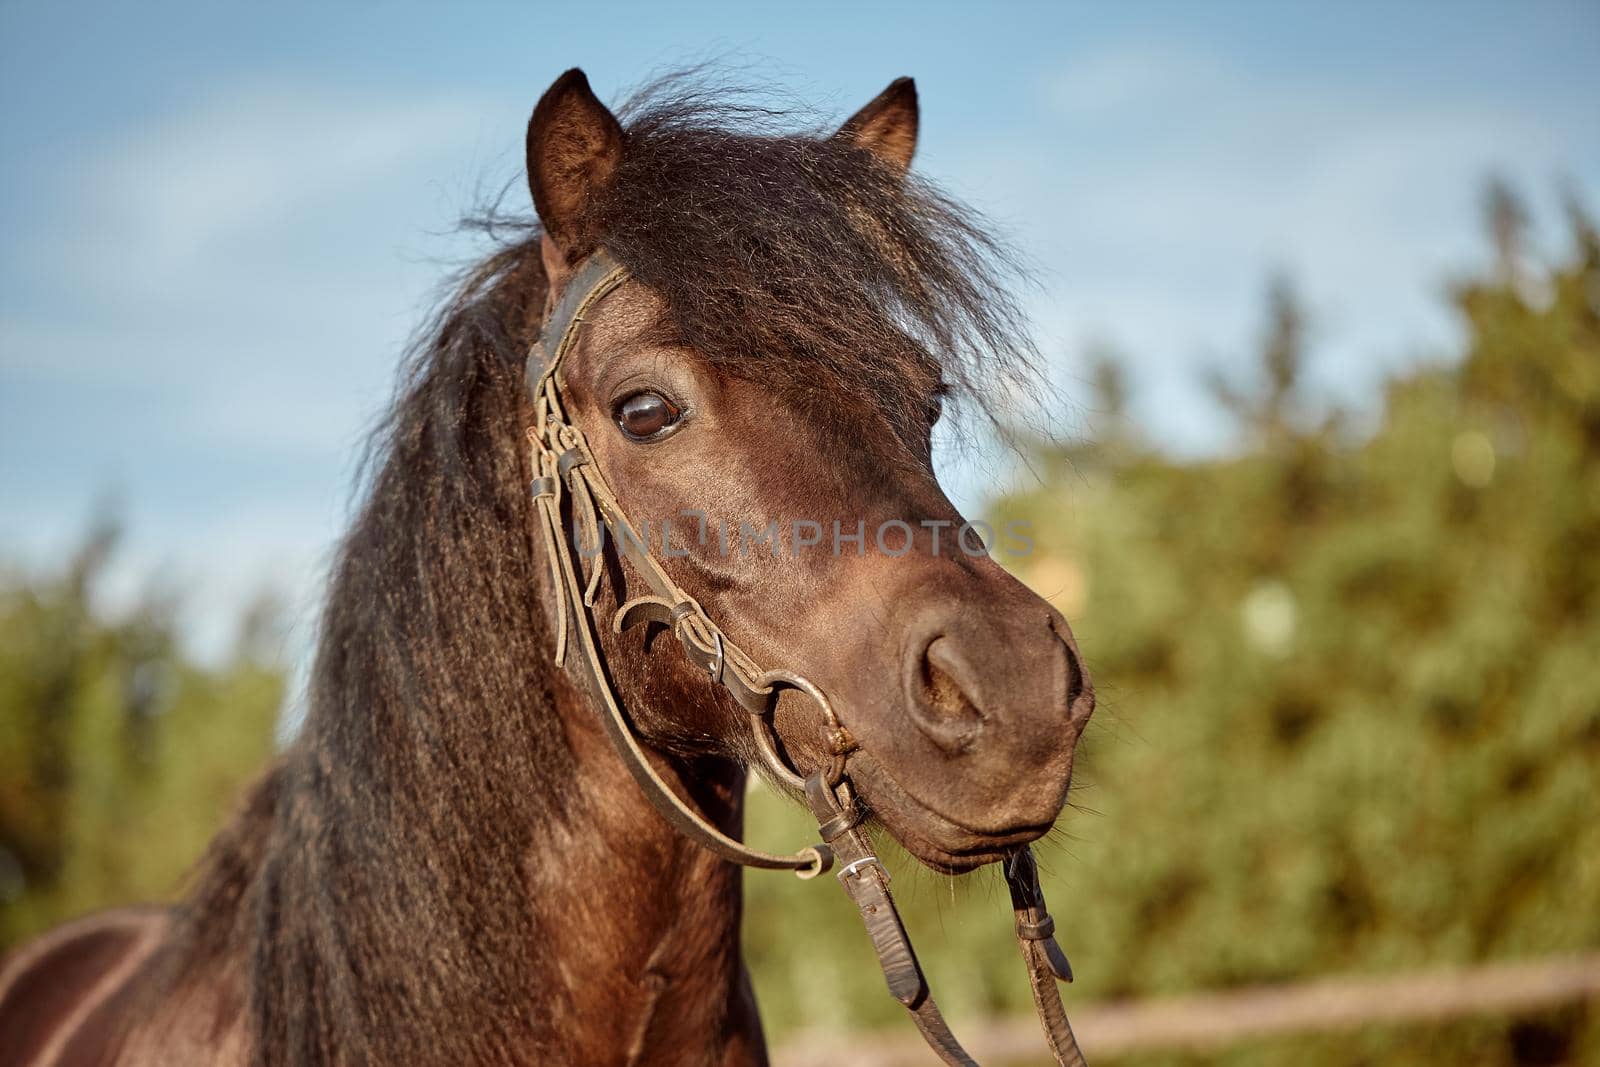 Beautiful brown pony, close-up of muzzle, cute look, mane, background of running field, corral, trees. Horses are wonderful animals